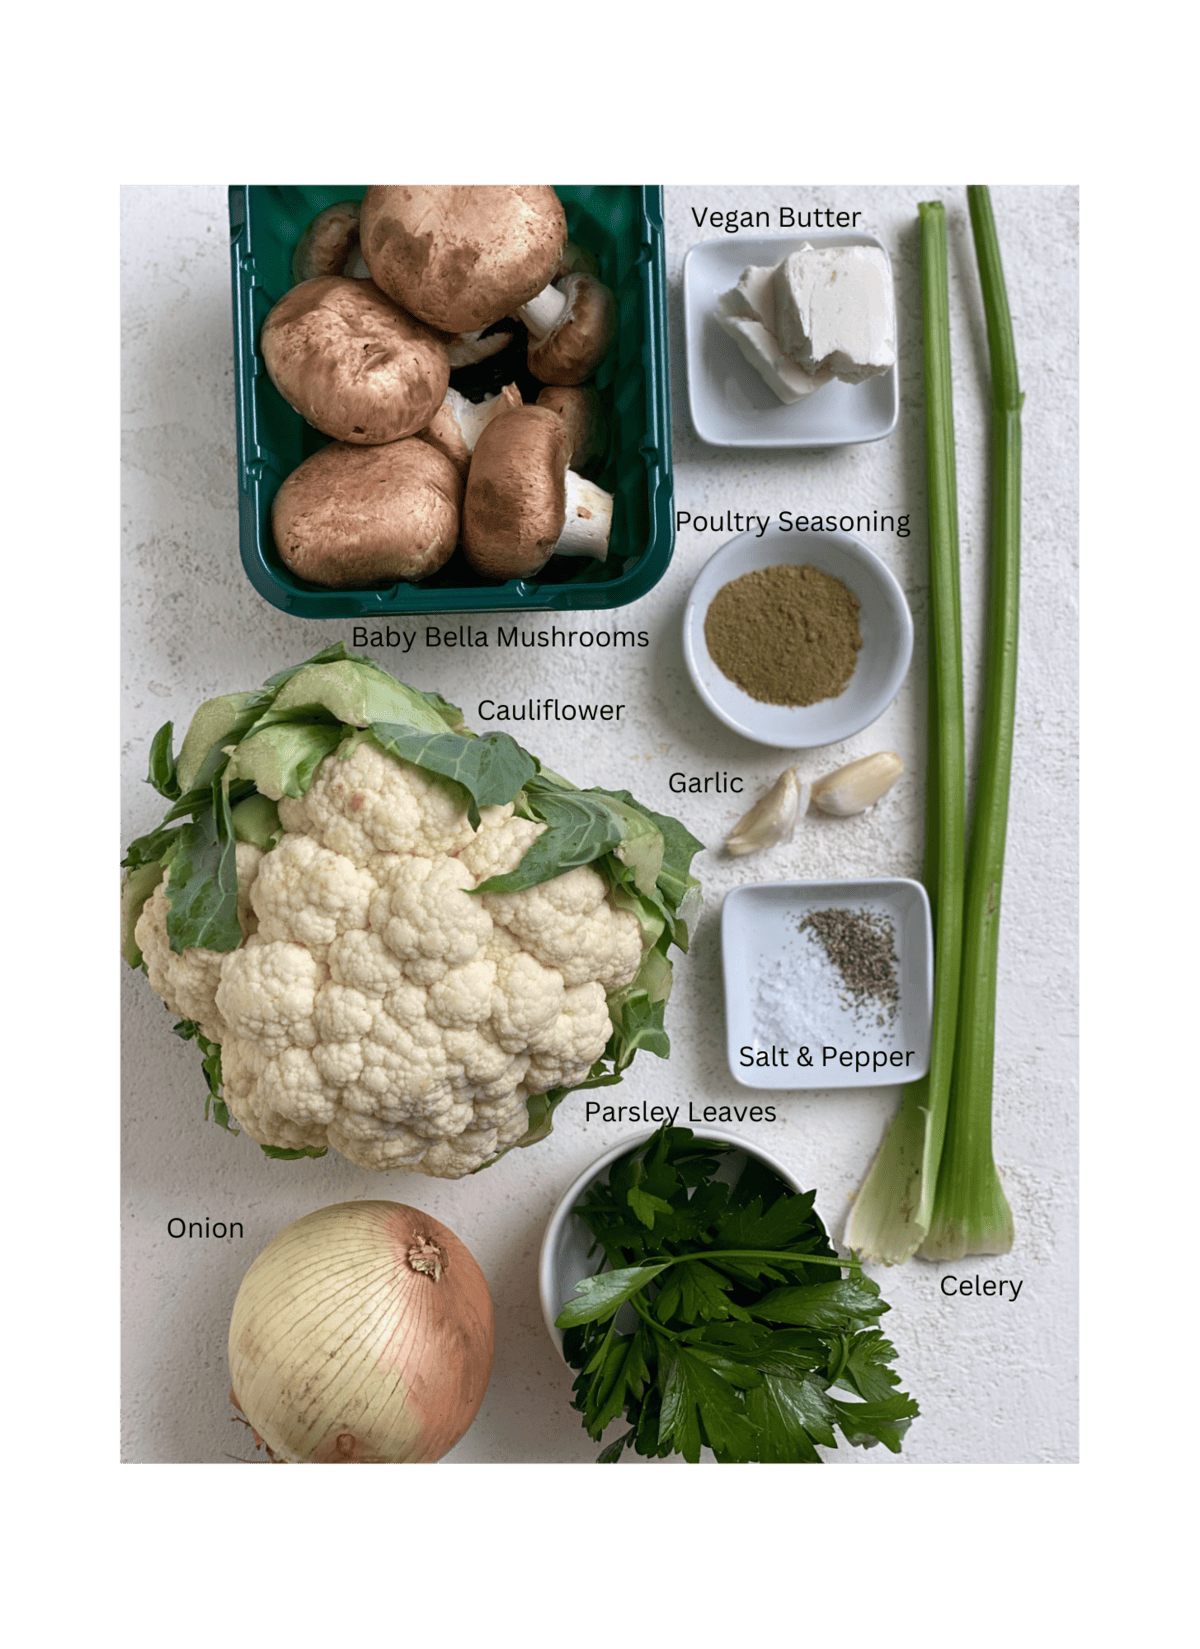 ingredients for The Best Cauliflower Stuffing measured out a،nst a white surface